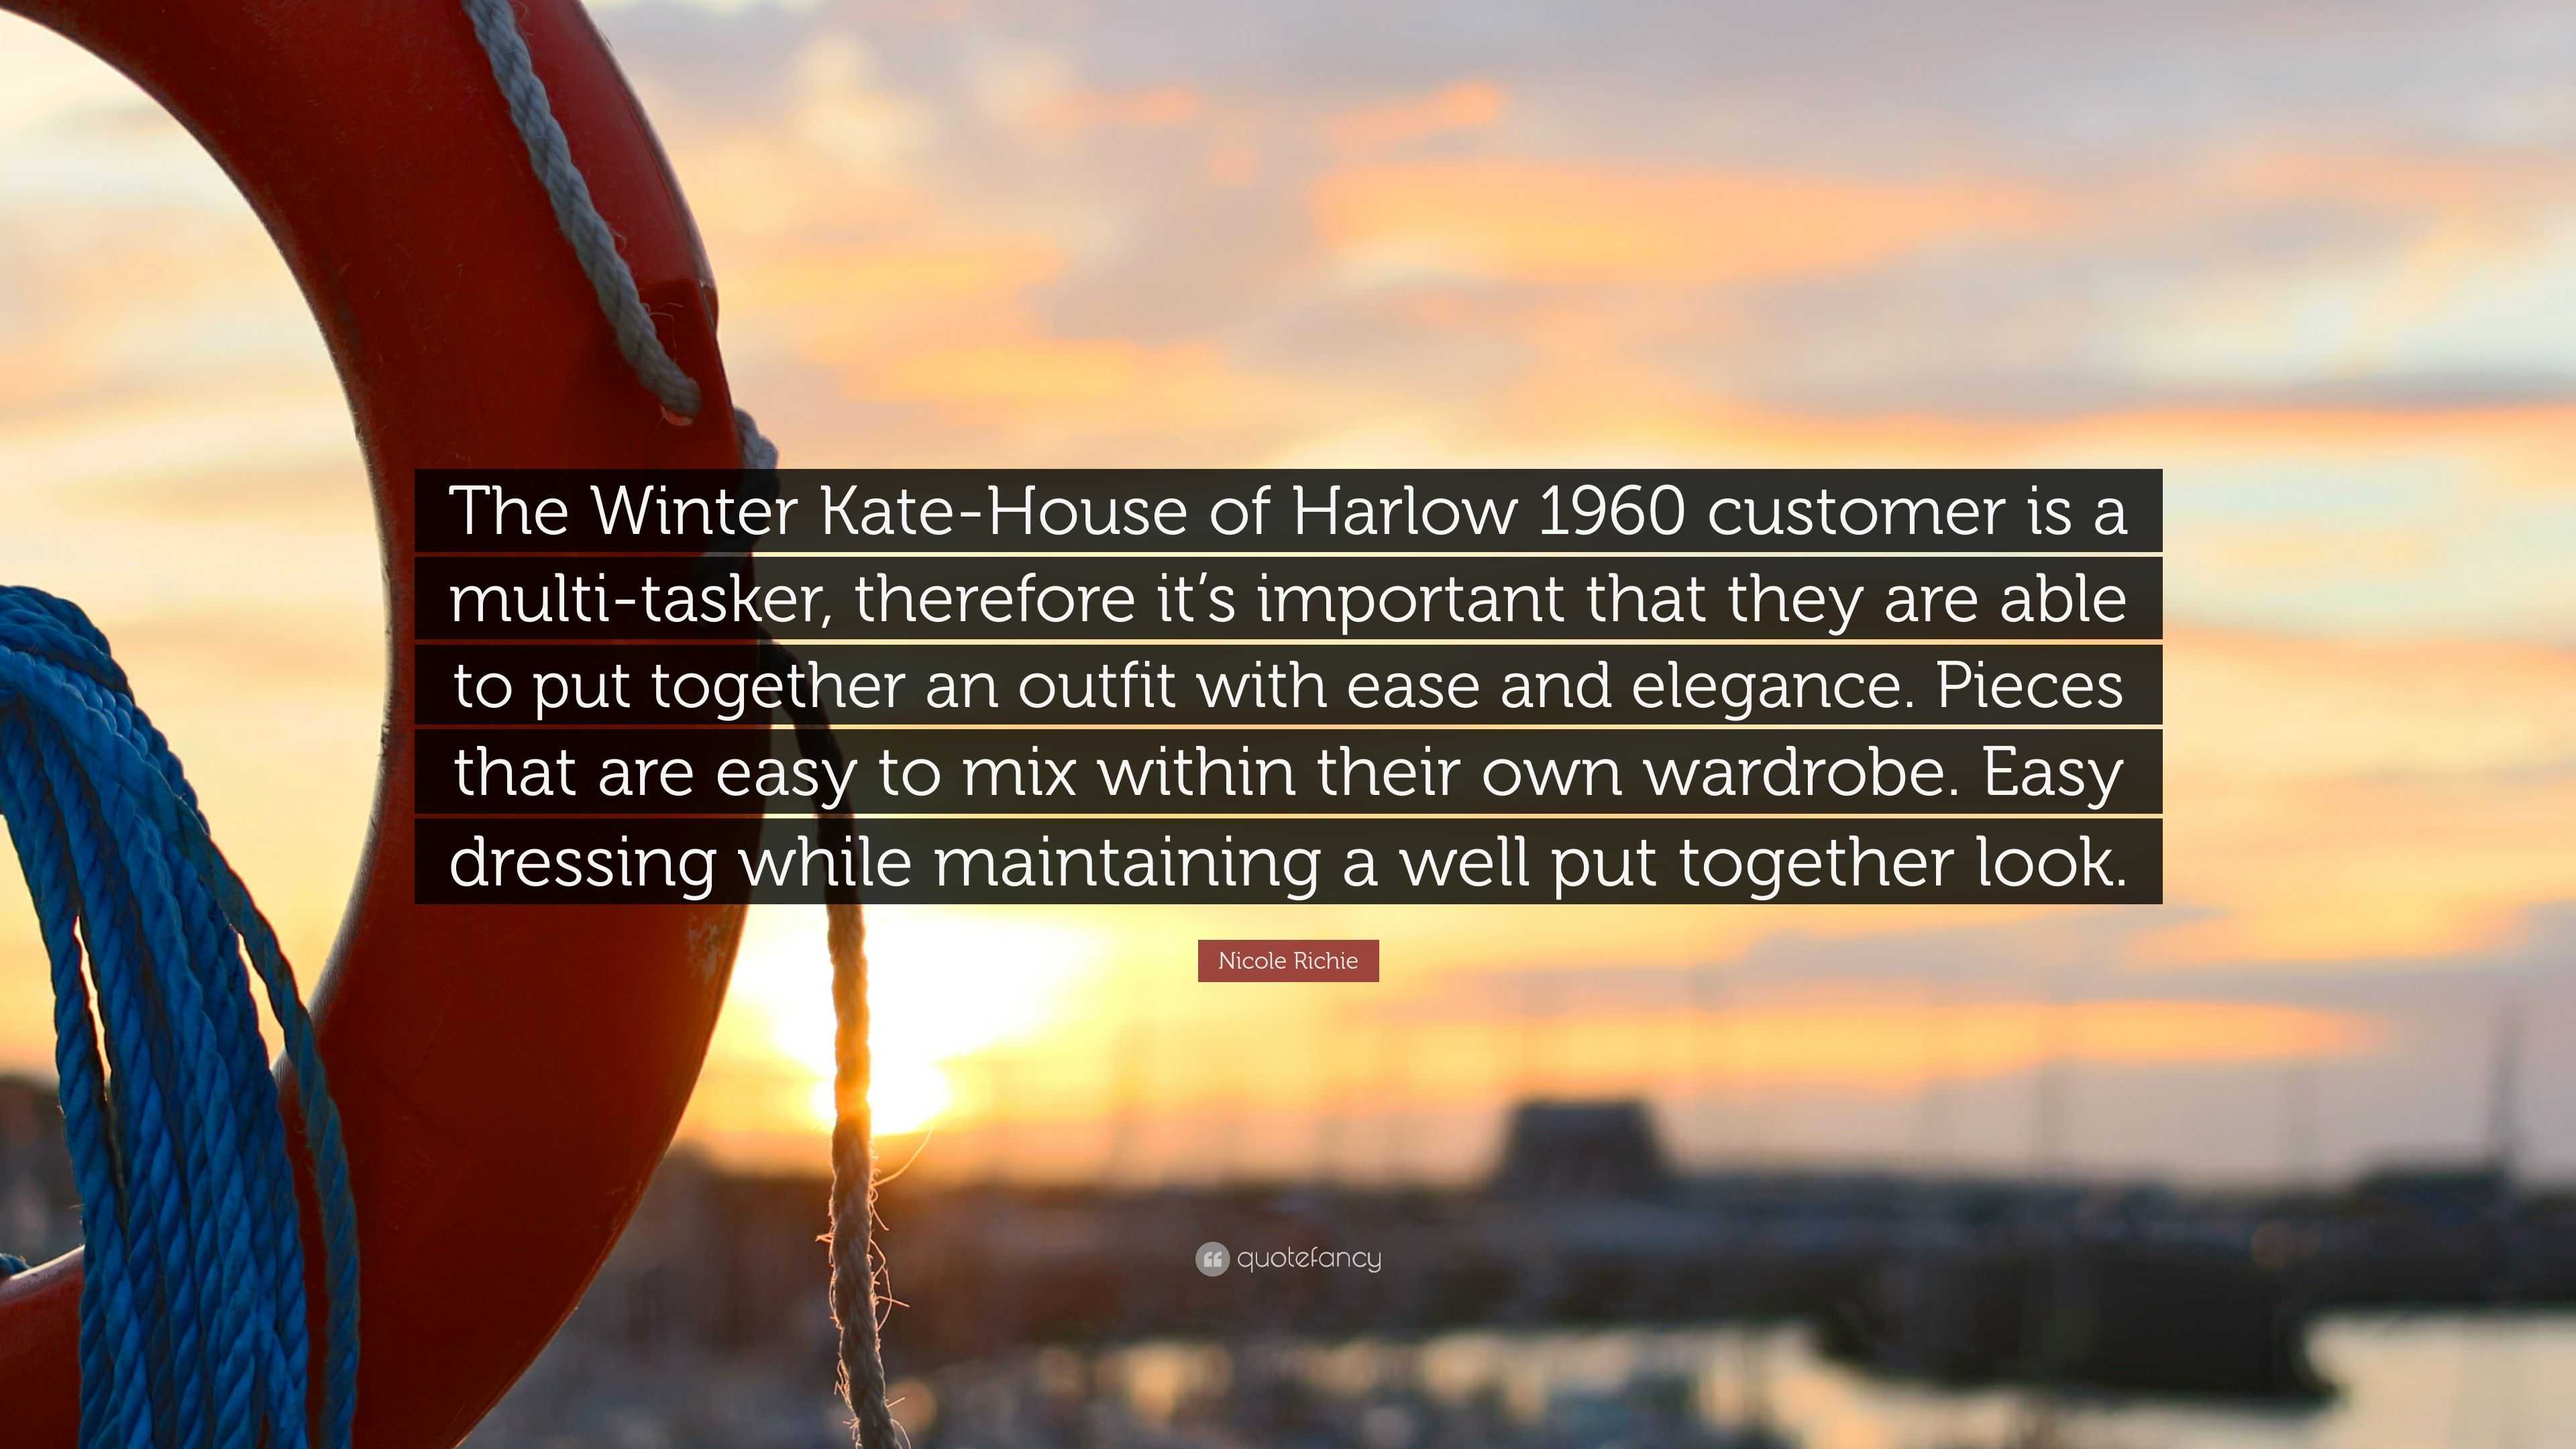 Nicole Richie “The Winter Kate-House of Harlow 1960 customer is a multi-tasker, therefore important that they are able to put toge...”